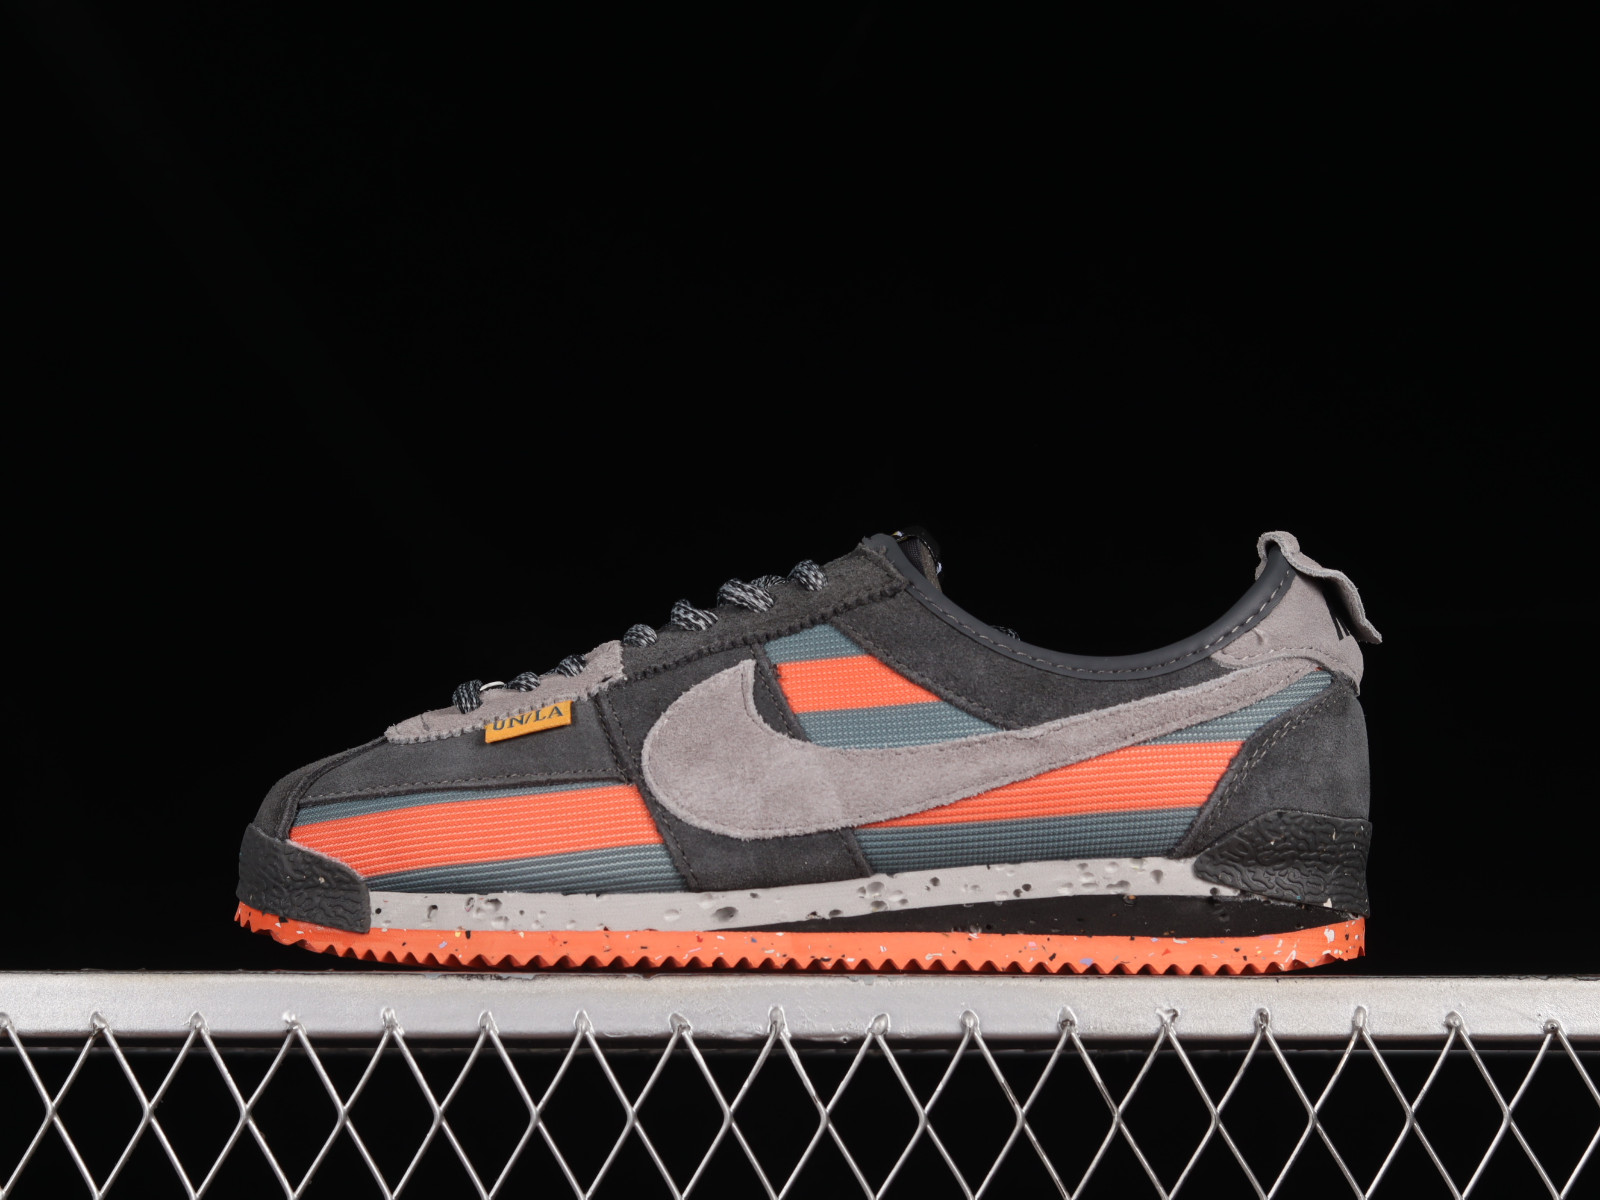 Union x Nike Cortez Black Orange Dark Grey DR1413 - MultiscaleconsultingShops - 015 sneakers in lady love life youtube